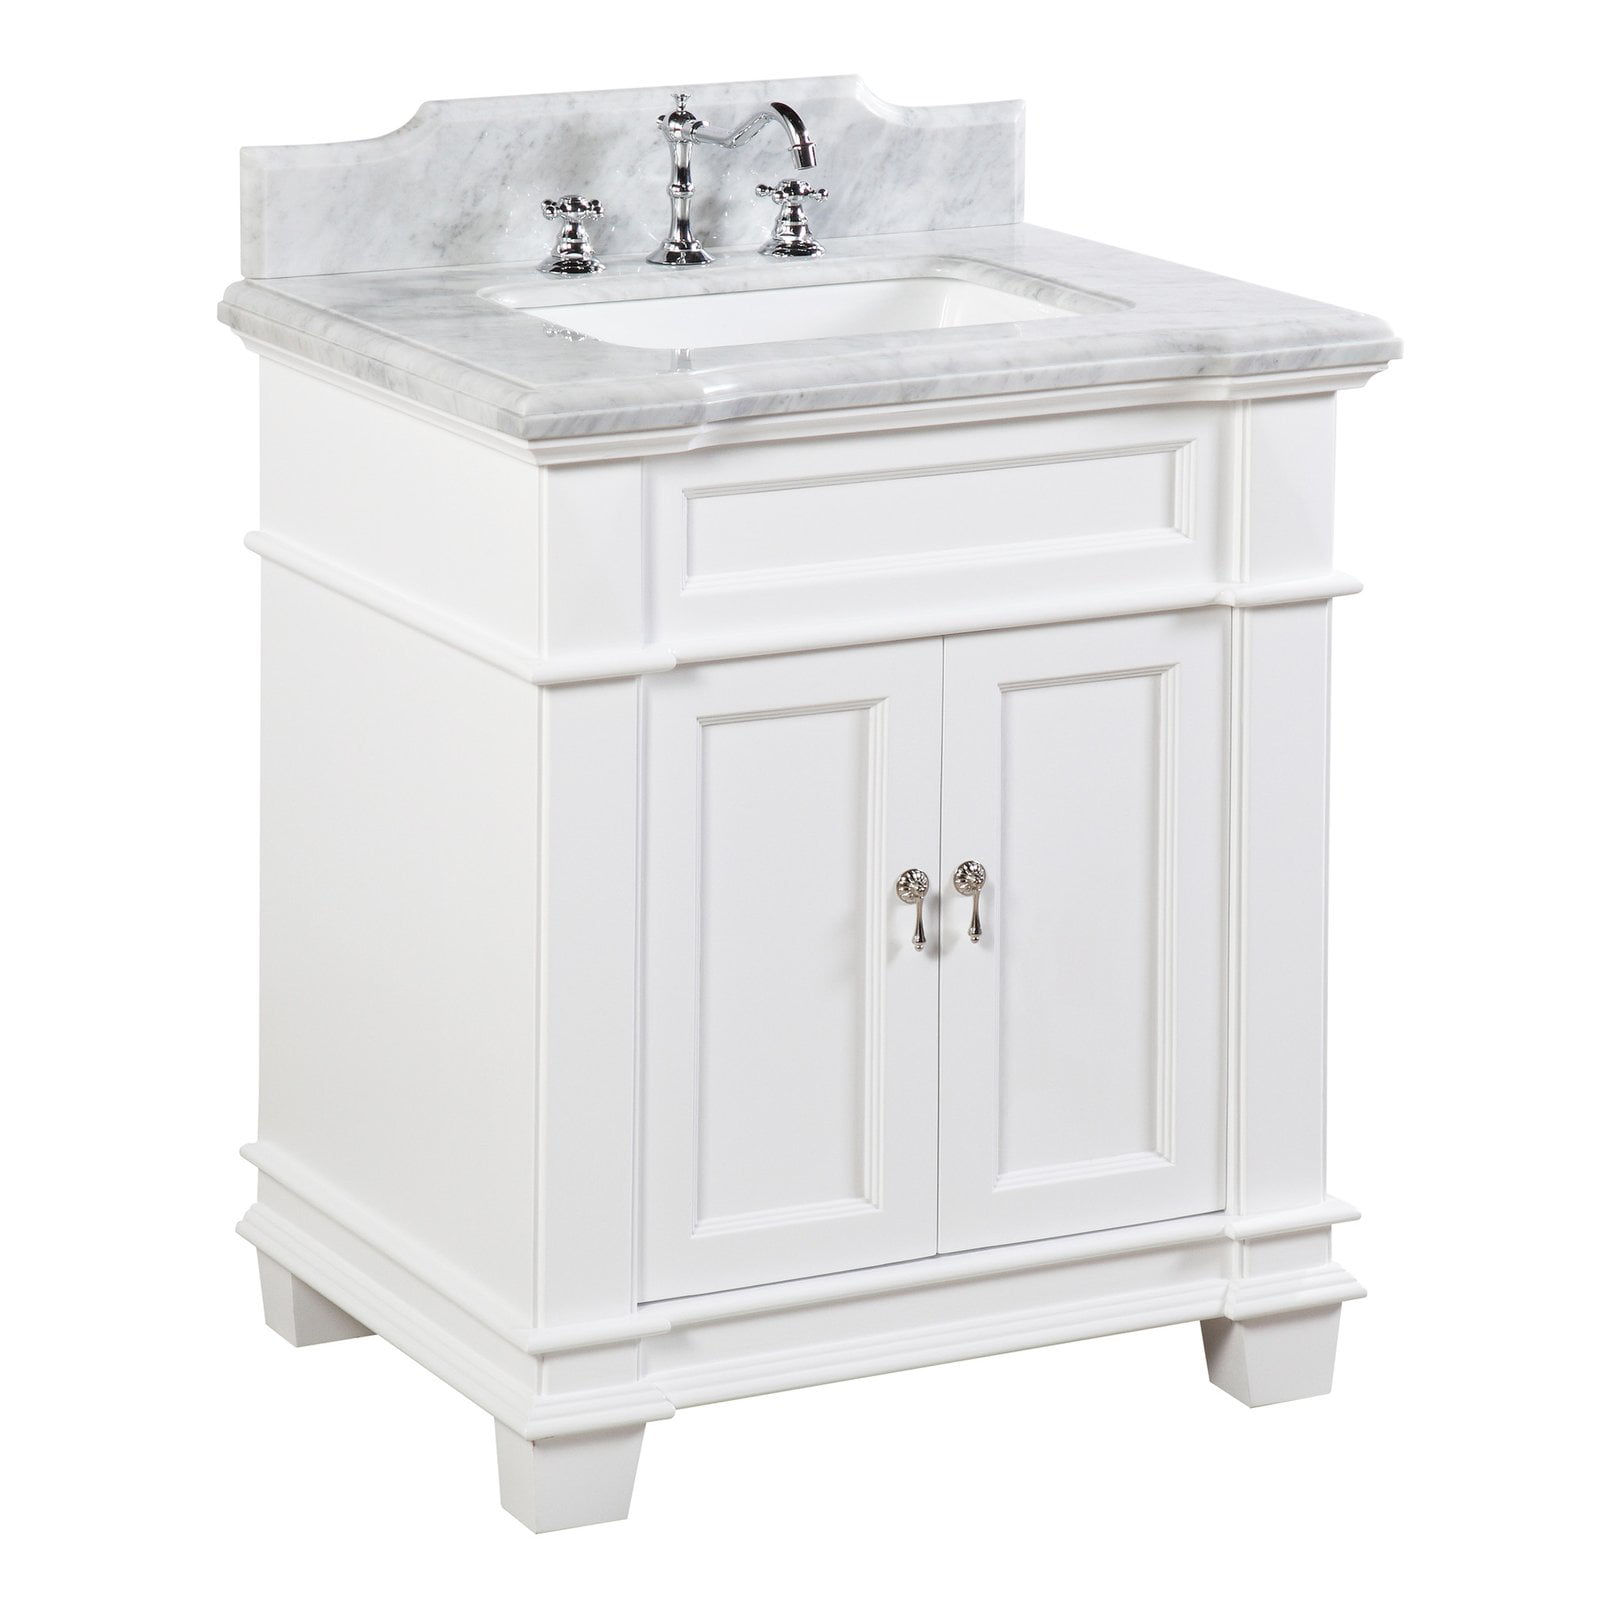 30 Bathroom Vanity With White Cabinet, 30 White Vanity With Carrara Marble Top